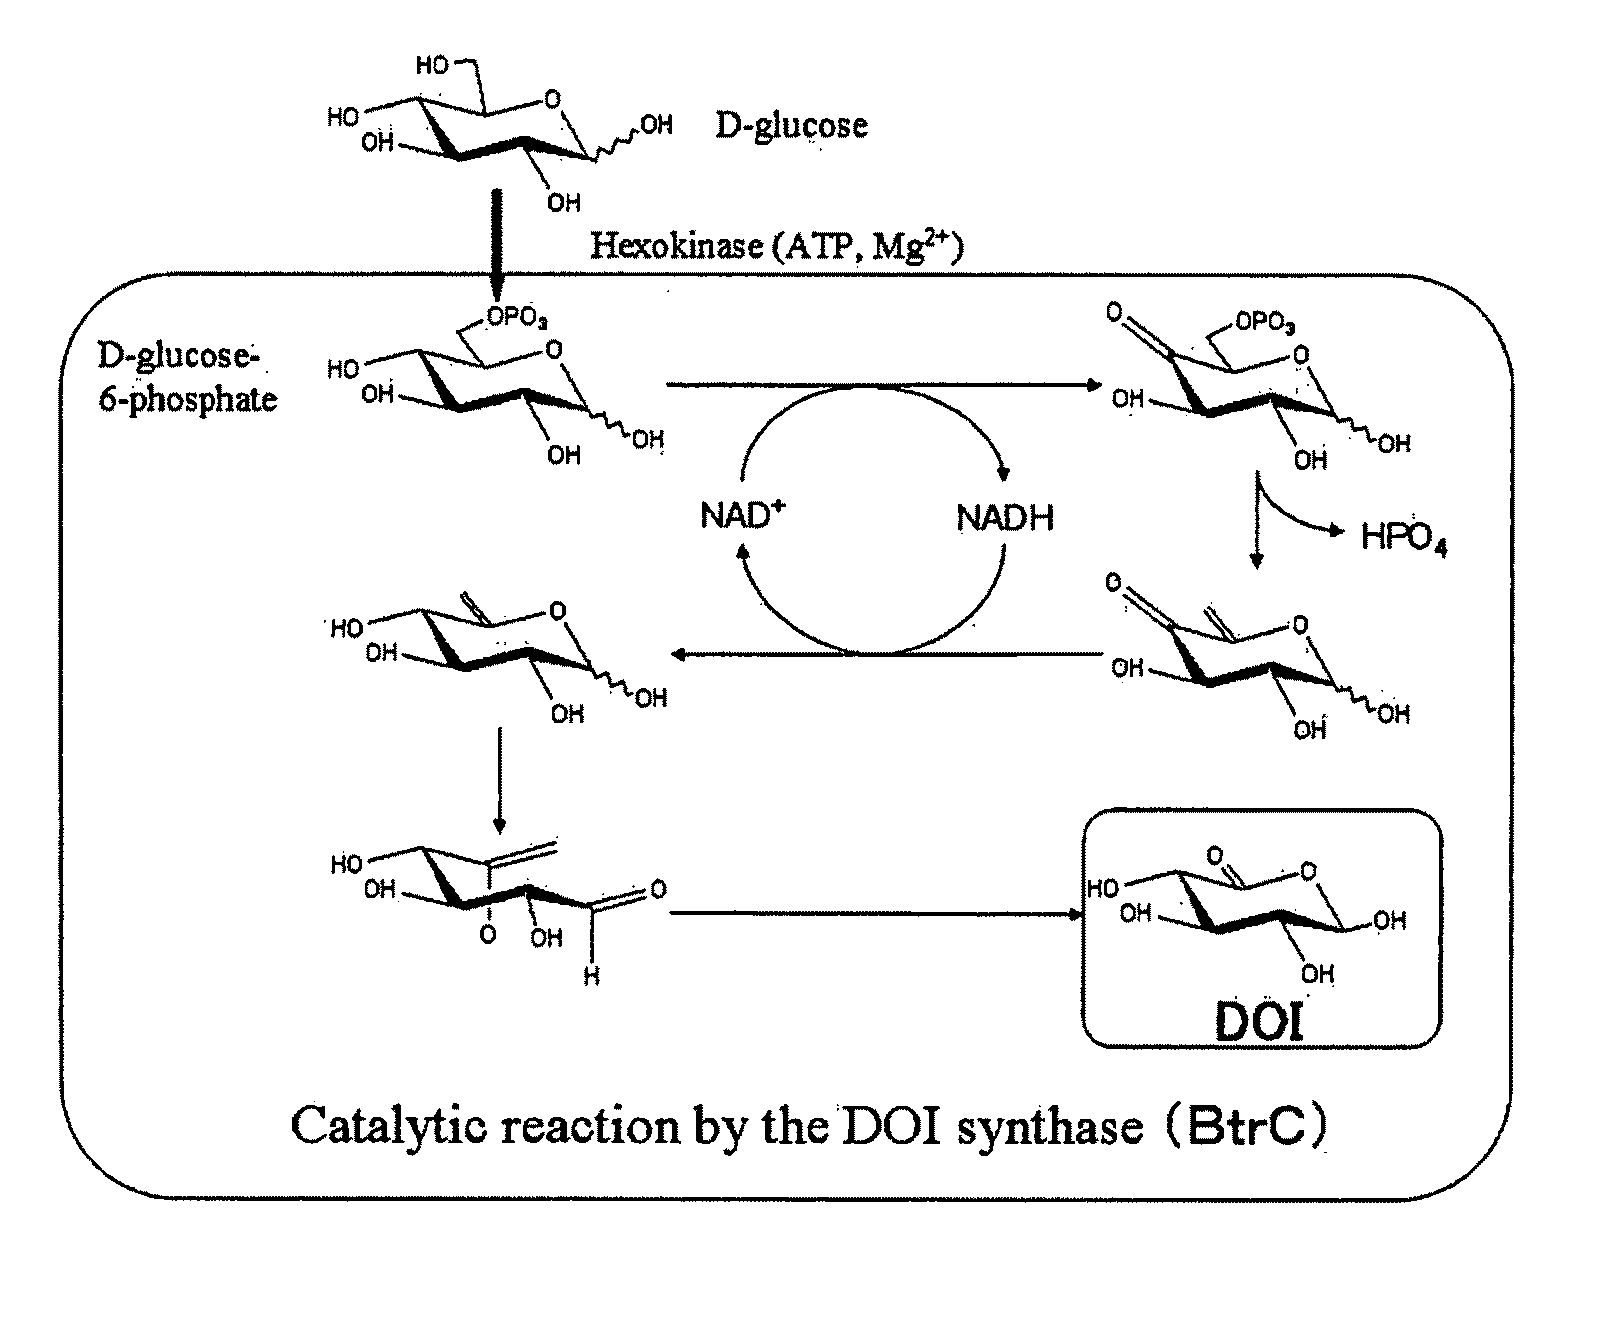 Gene Expression Cassette and a Transformant, and a Method for Manufacturing 2-Deoxy-Scyllo-Inosose and a Method for Purifying 2-Deoxy-Scyllo-Inosose Using Said Transformant